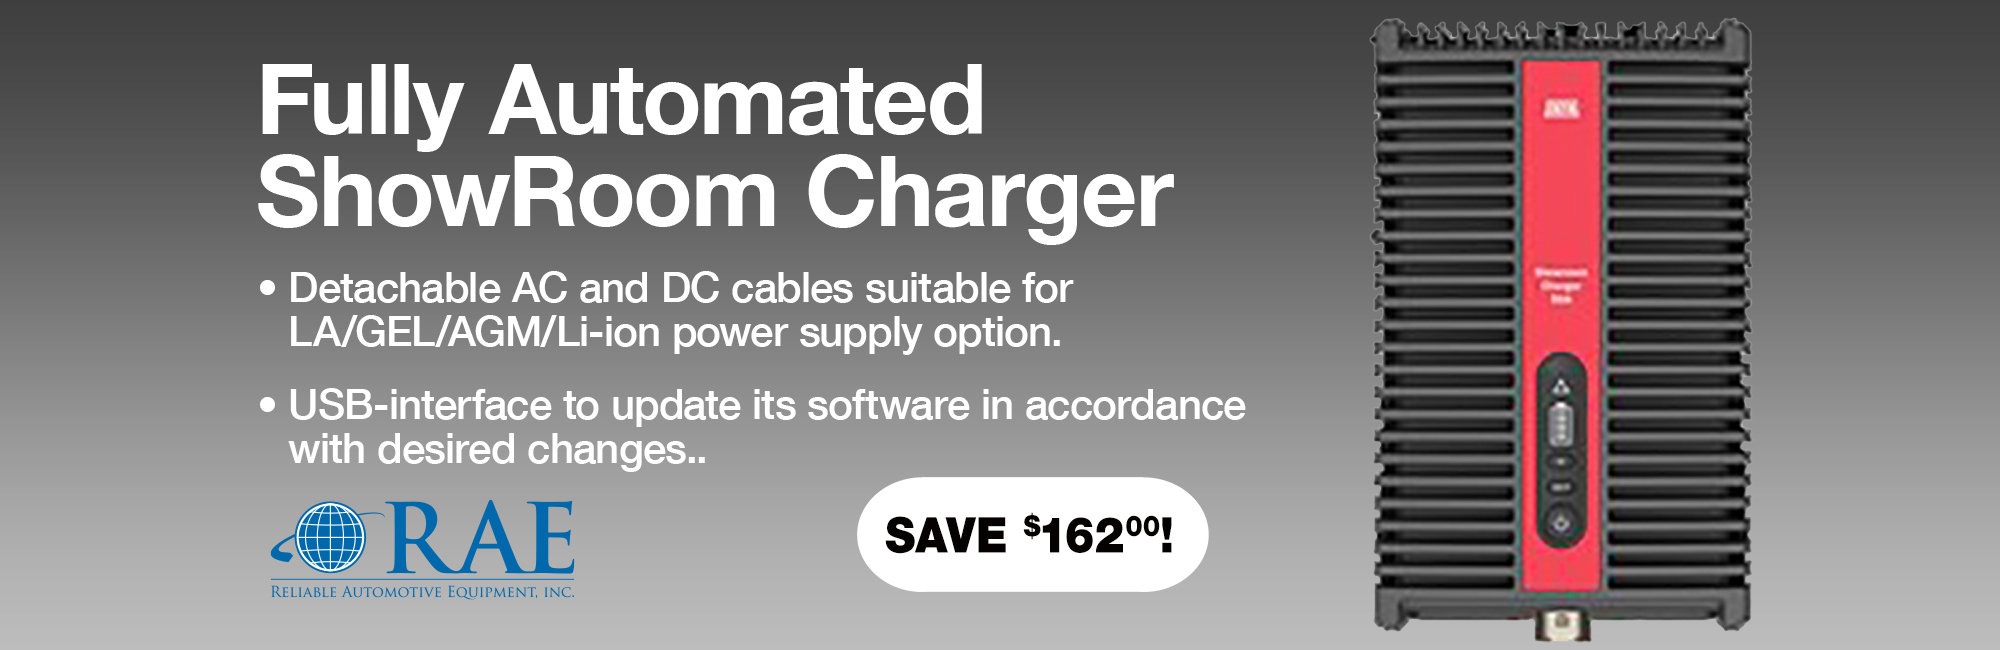 Save on a showroom charger